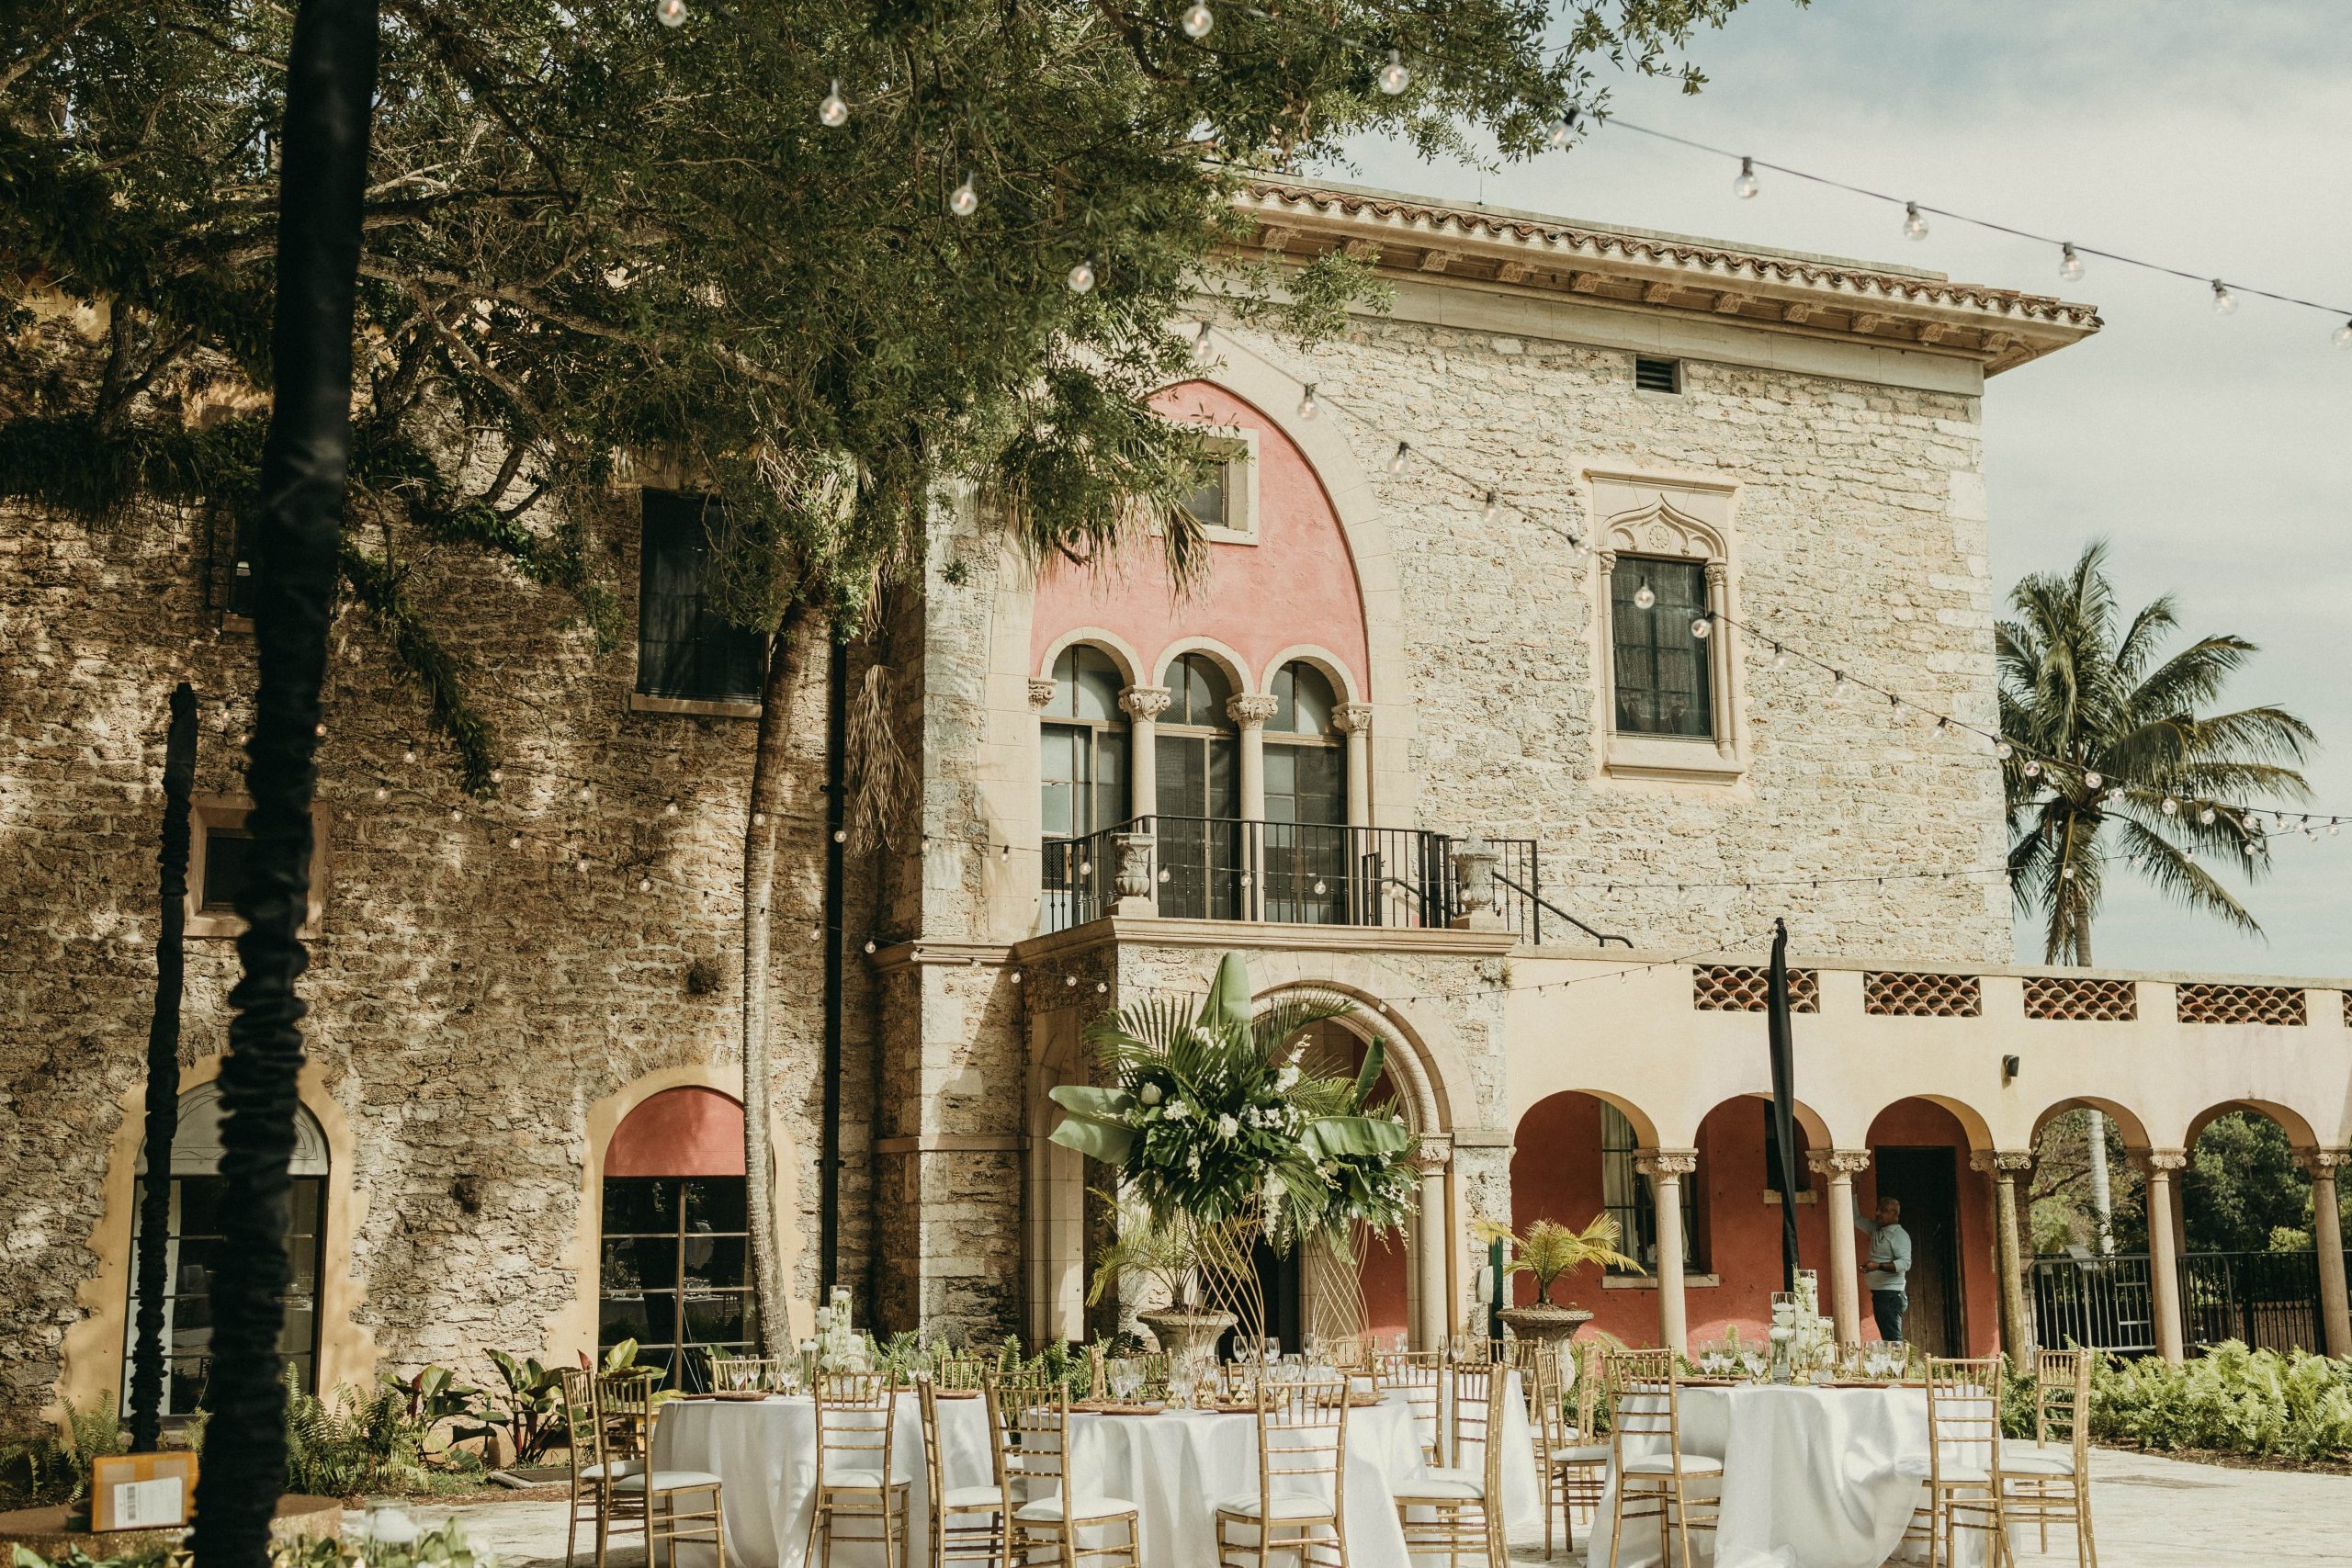 View of the Courtyard wedding reception. The Stone House museum is in the background.